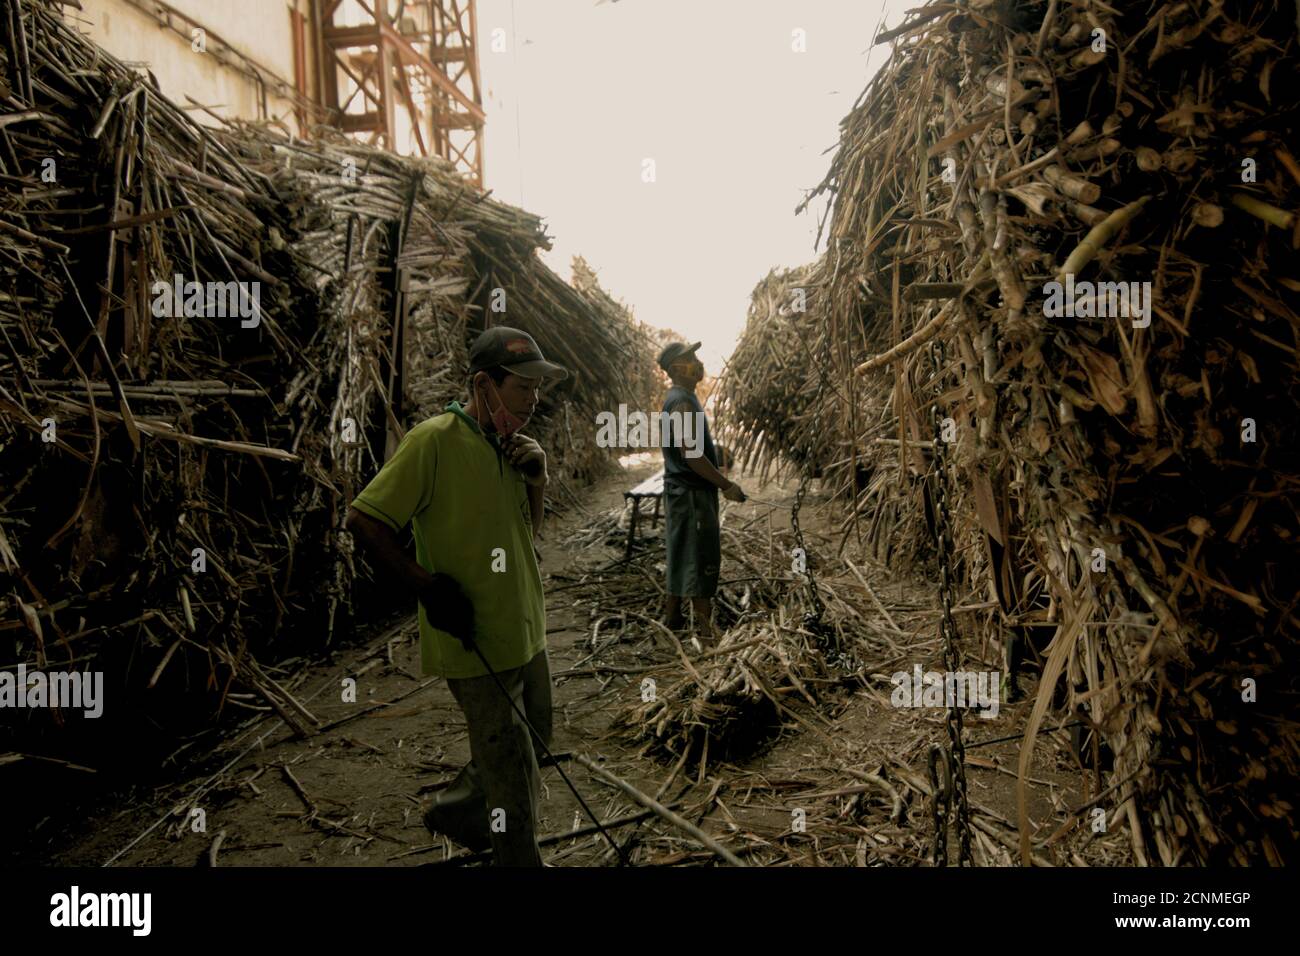 Workers checking, sorting and cleaning sugarcane supplies before the processing phases at Tasikmadu Sugar Mill in Karanganyar, Central Java, Indonesia Stock Photo